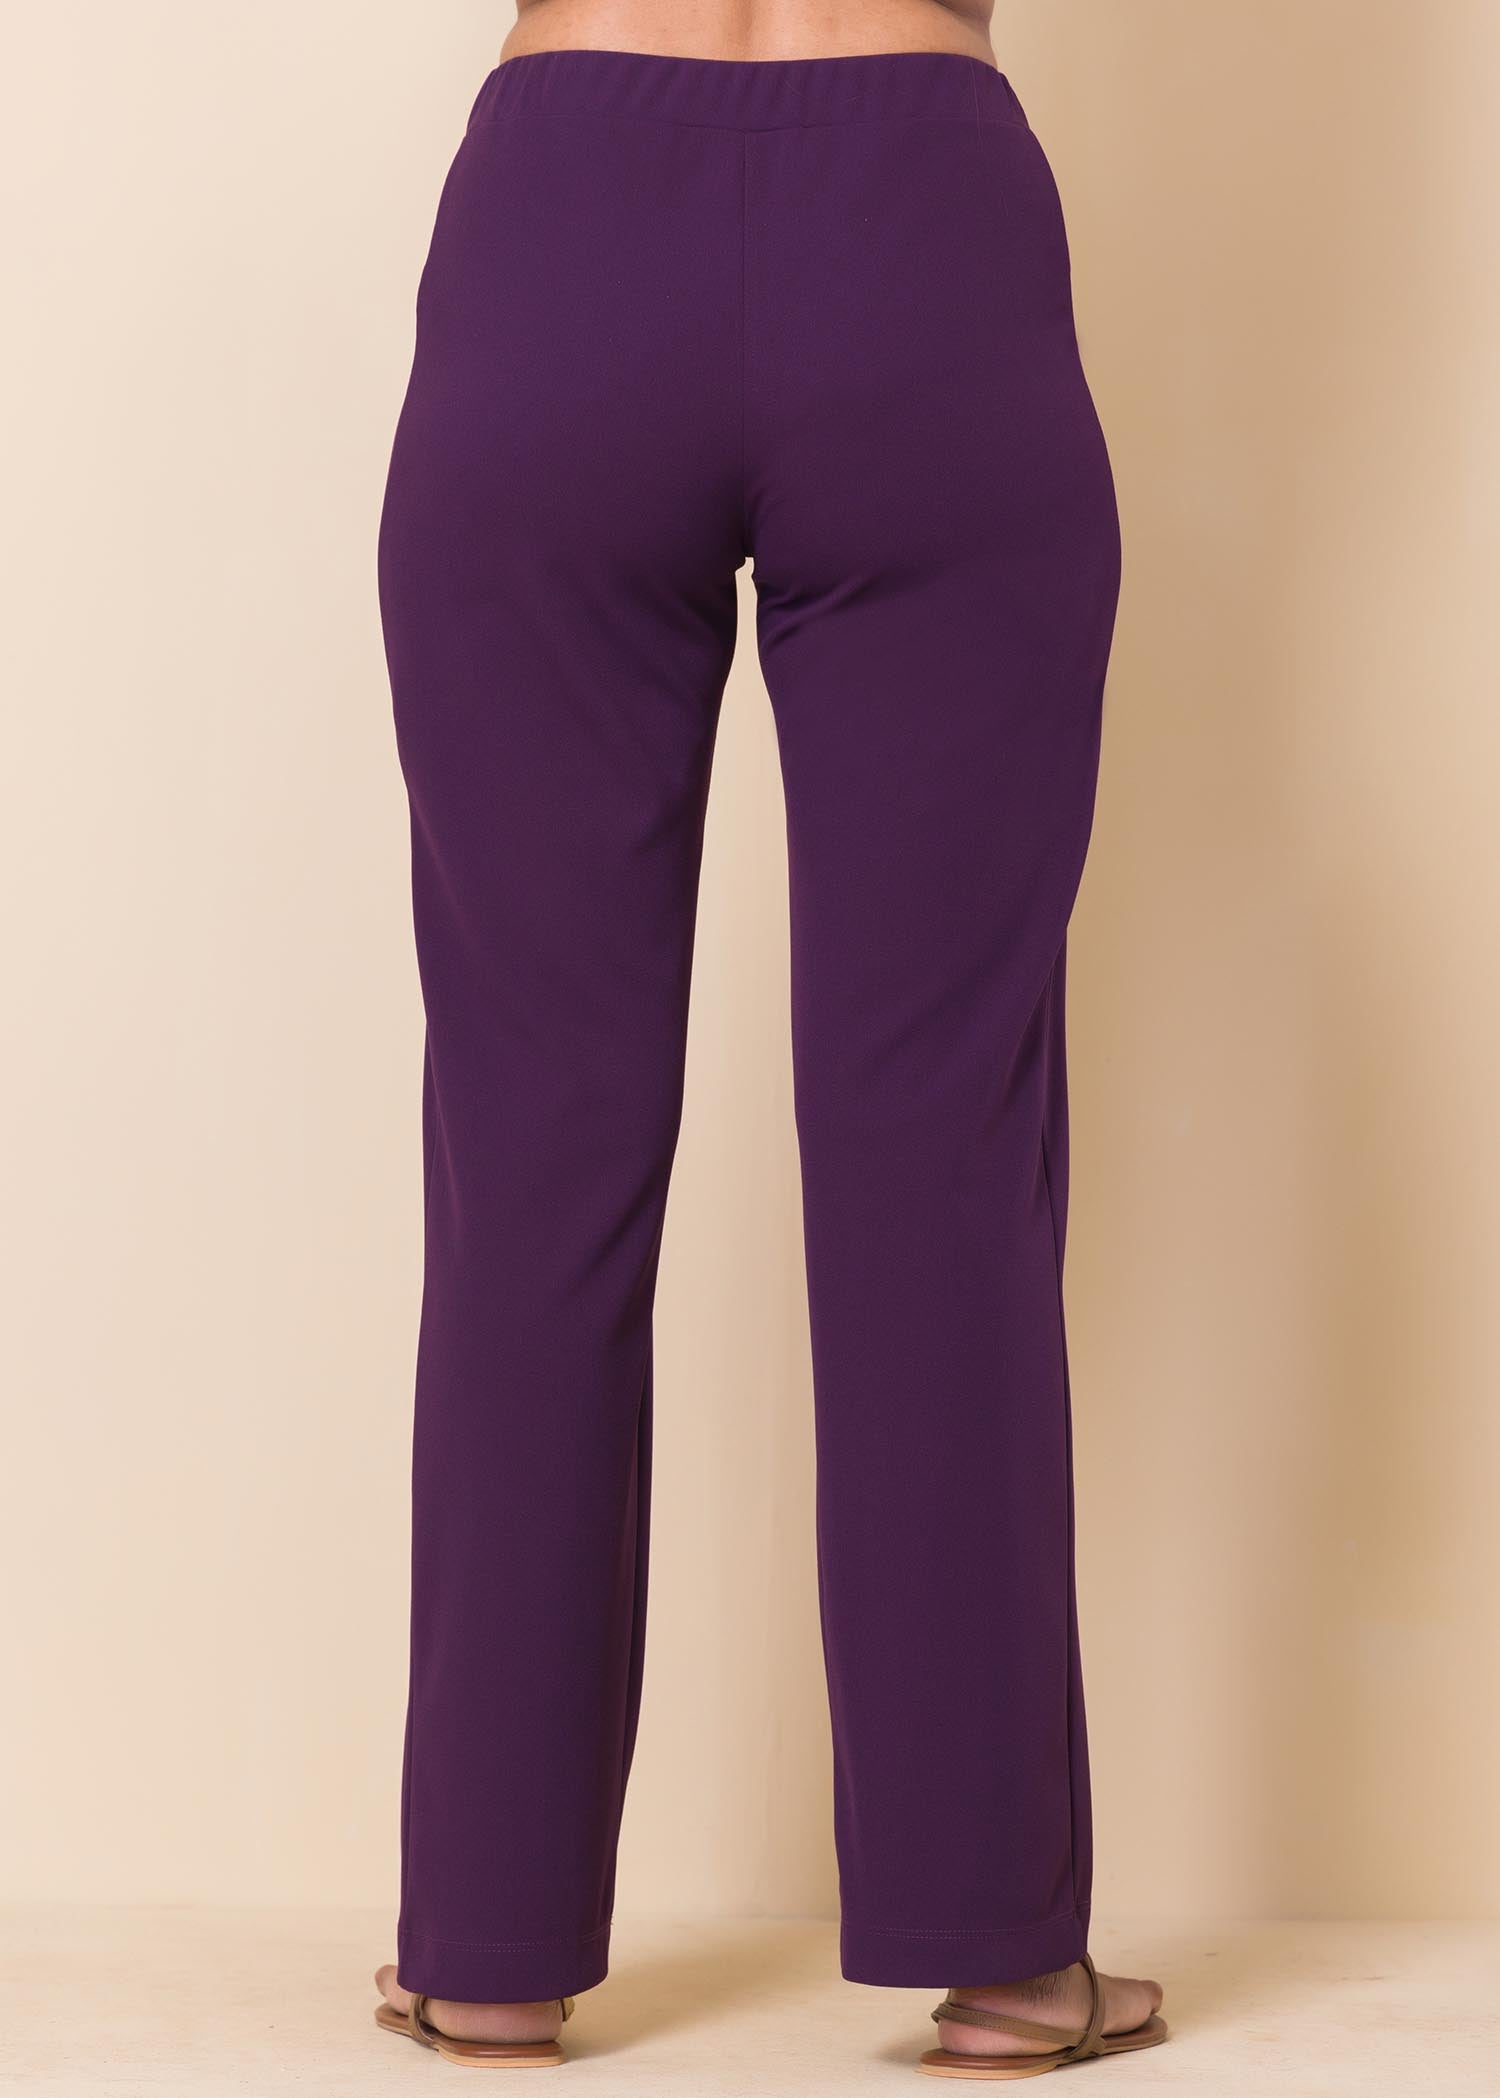 Straight legged pant with side panel